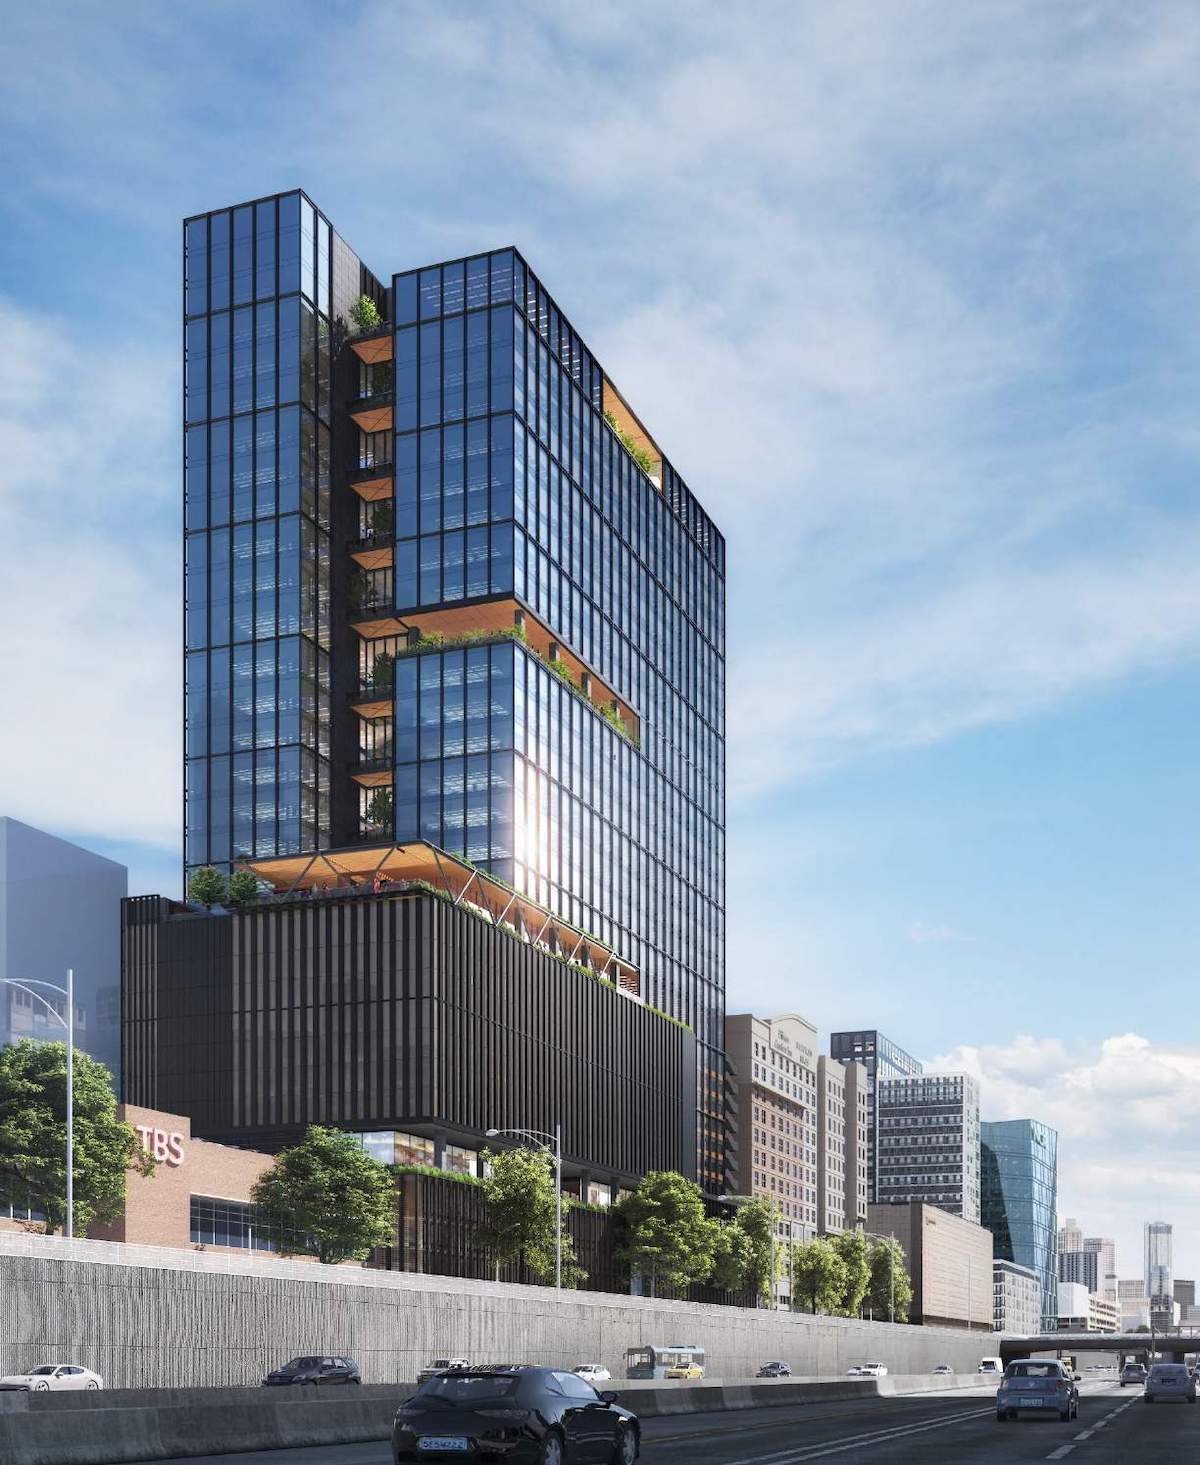 $224M+ Construction Loan Arranged for Speculative Portman Holdings Office Tower